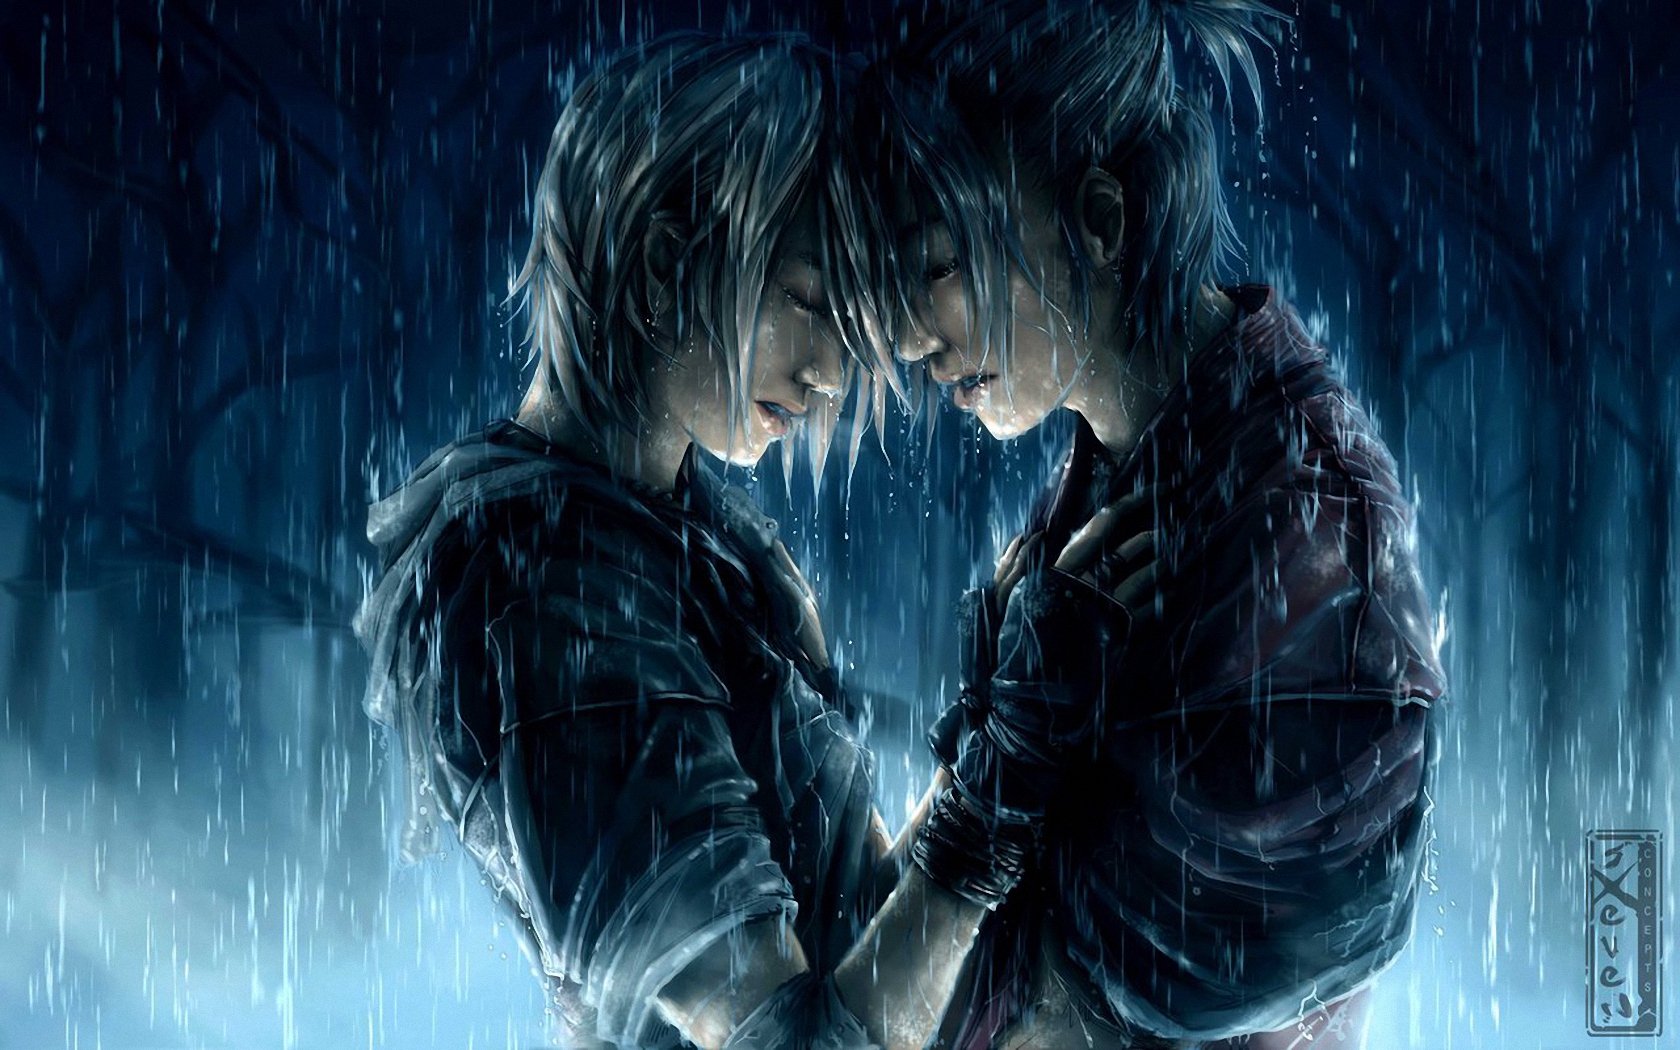 Gothic Love Wallpapers